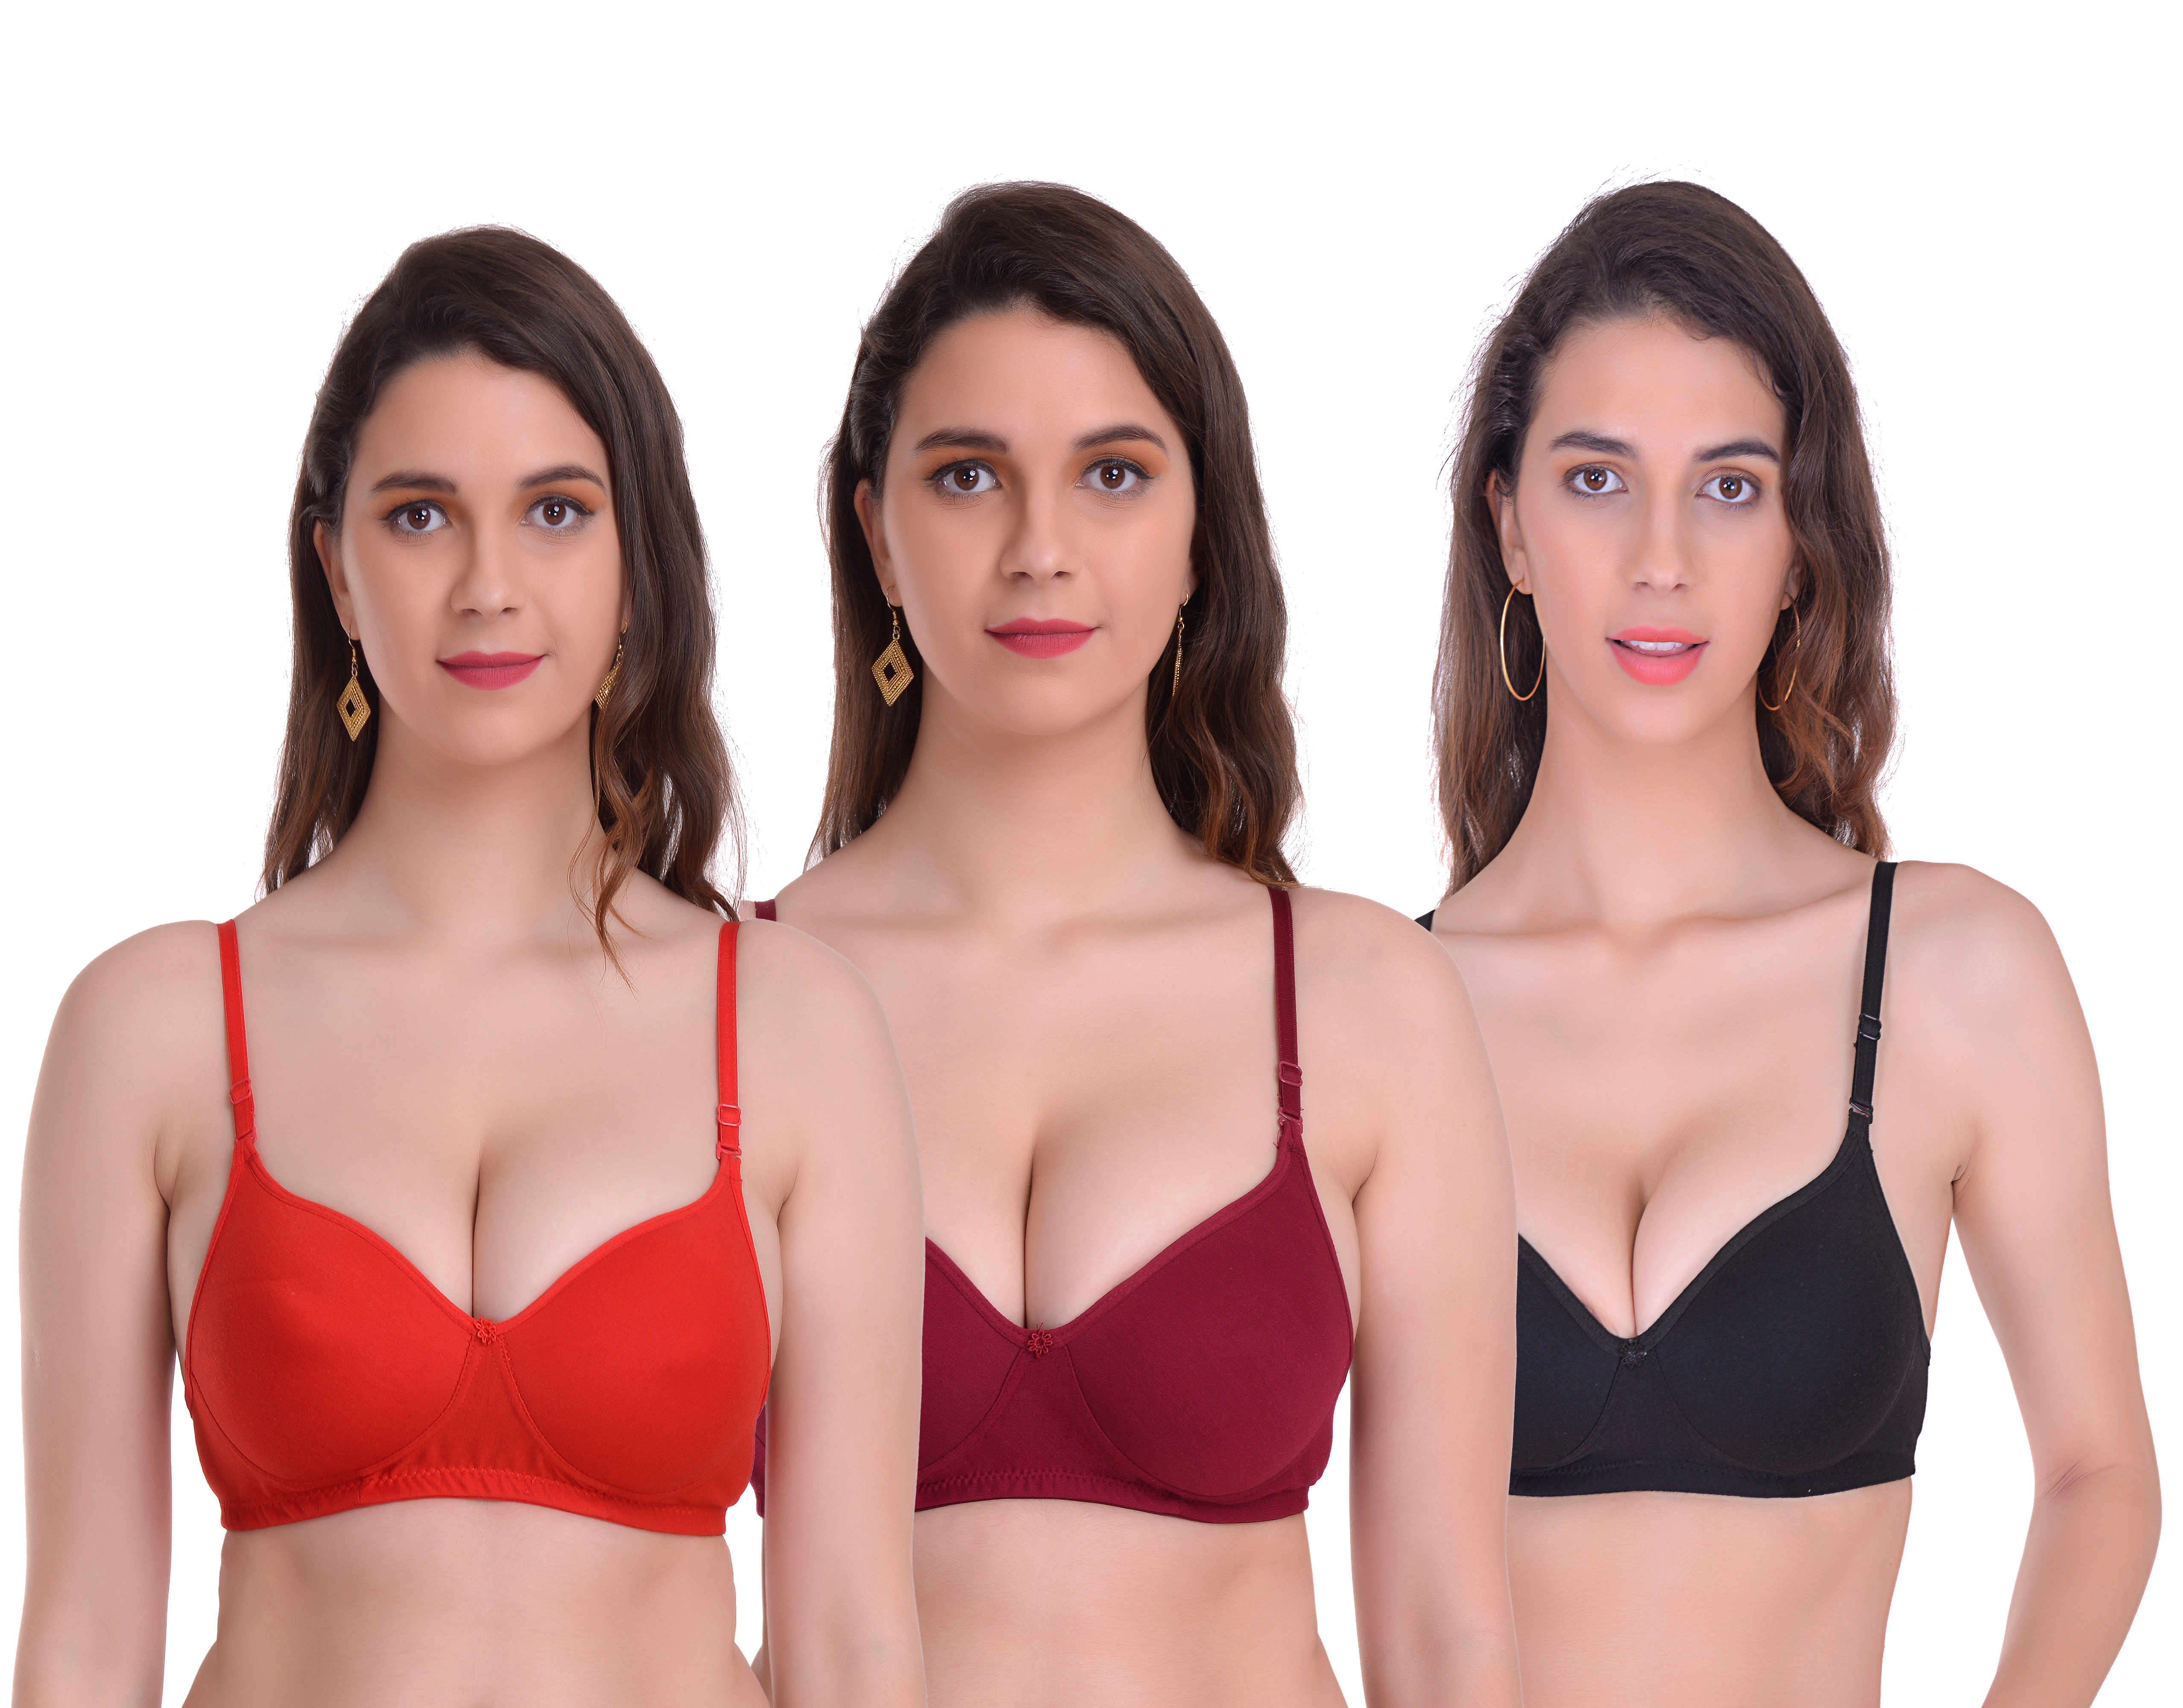 Mynte | Mynte Women's Cotton Rich Lightly Padded Non-Wired Full Cup Regular Bra (Pack of 3) (Red/Maroon/Black,30) (MY-CPPB-7RMBK-30)